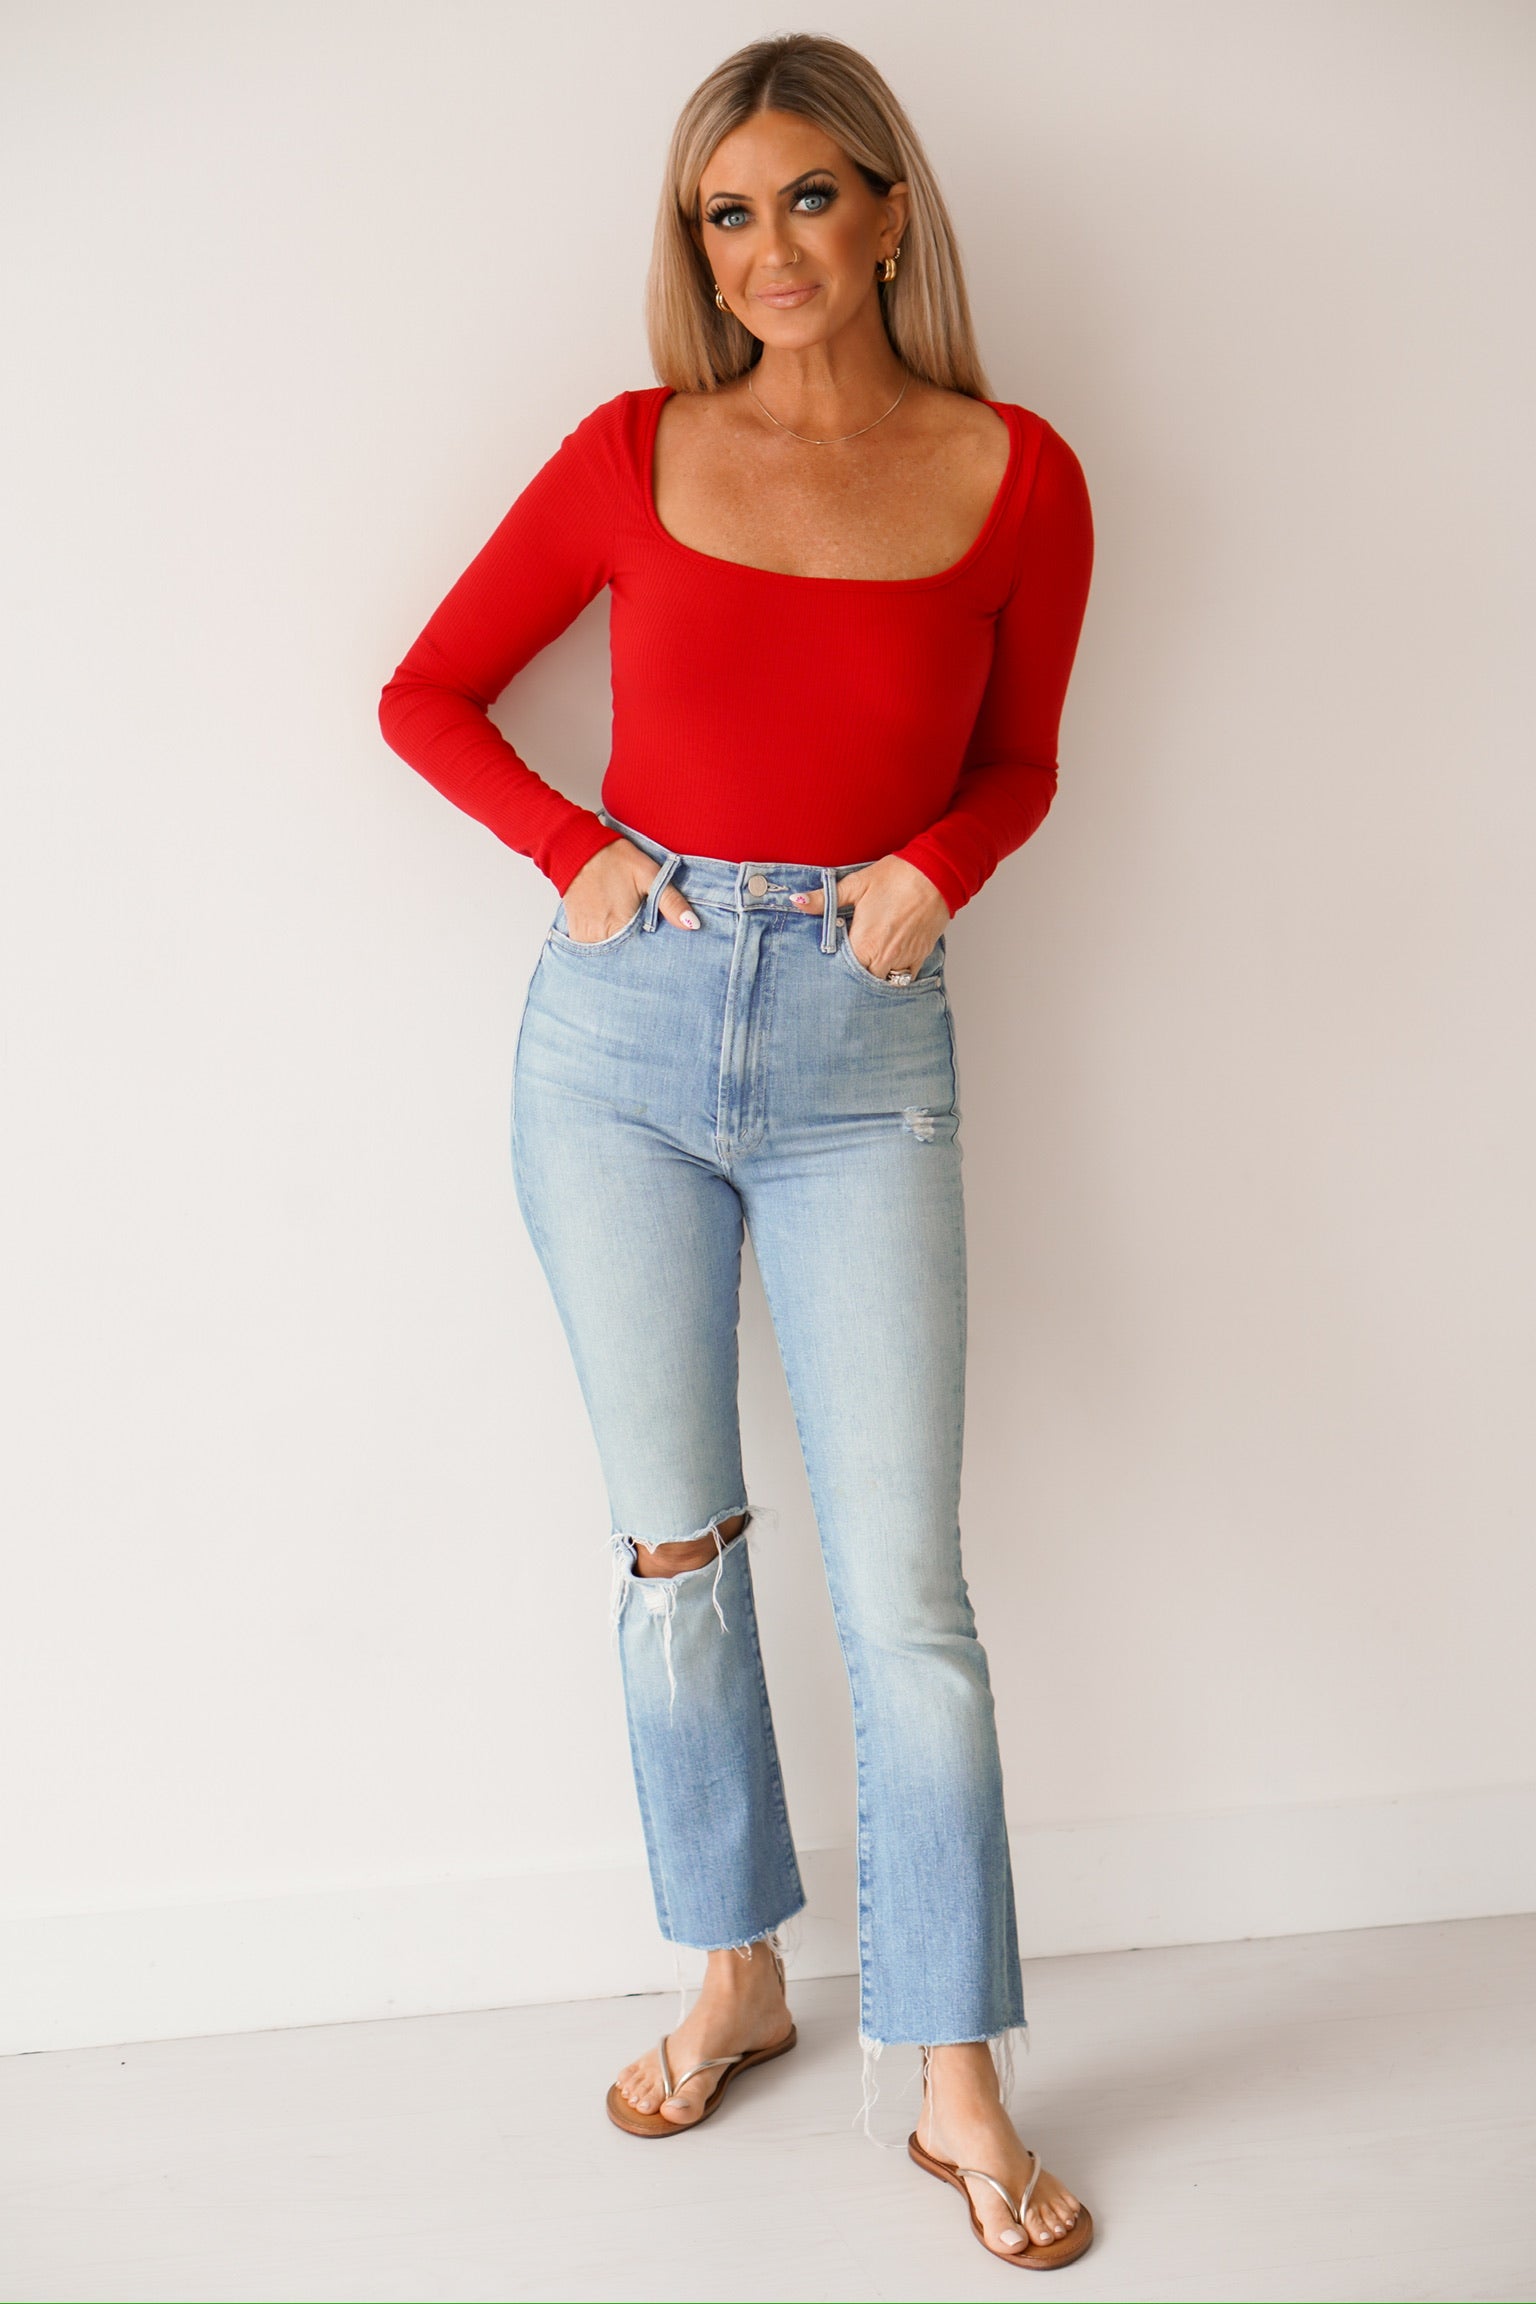 Blonde headed girl standing against a white wall wearing sandals, denim jeans, and a red long sleeve top 